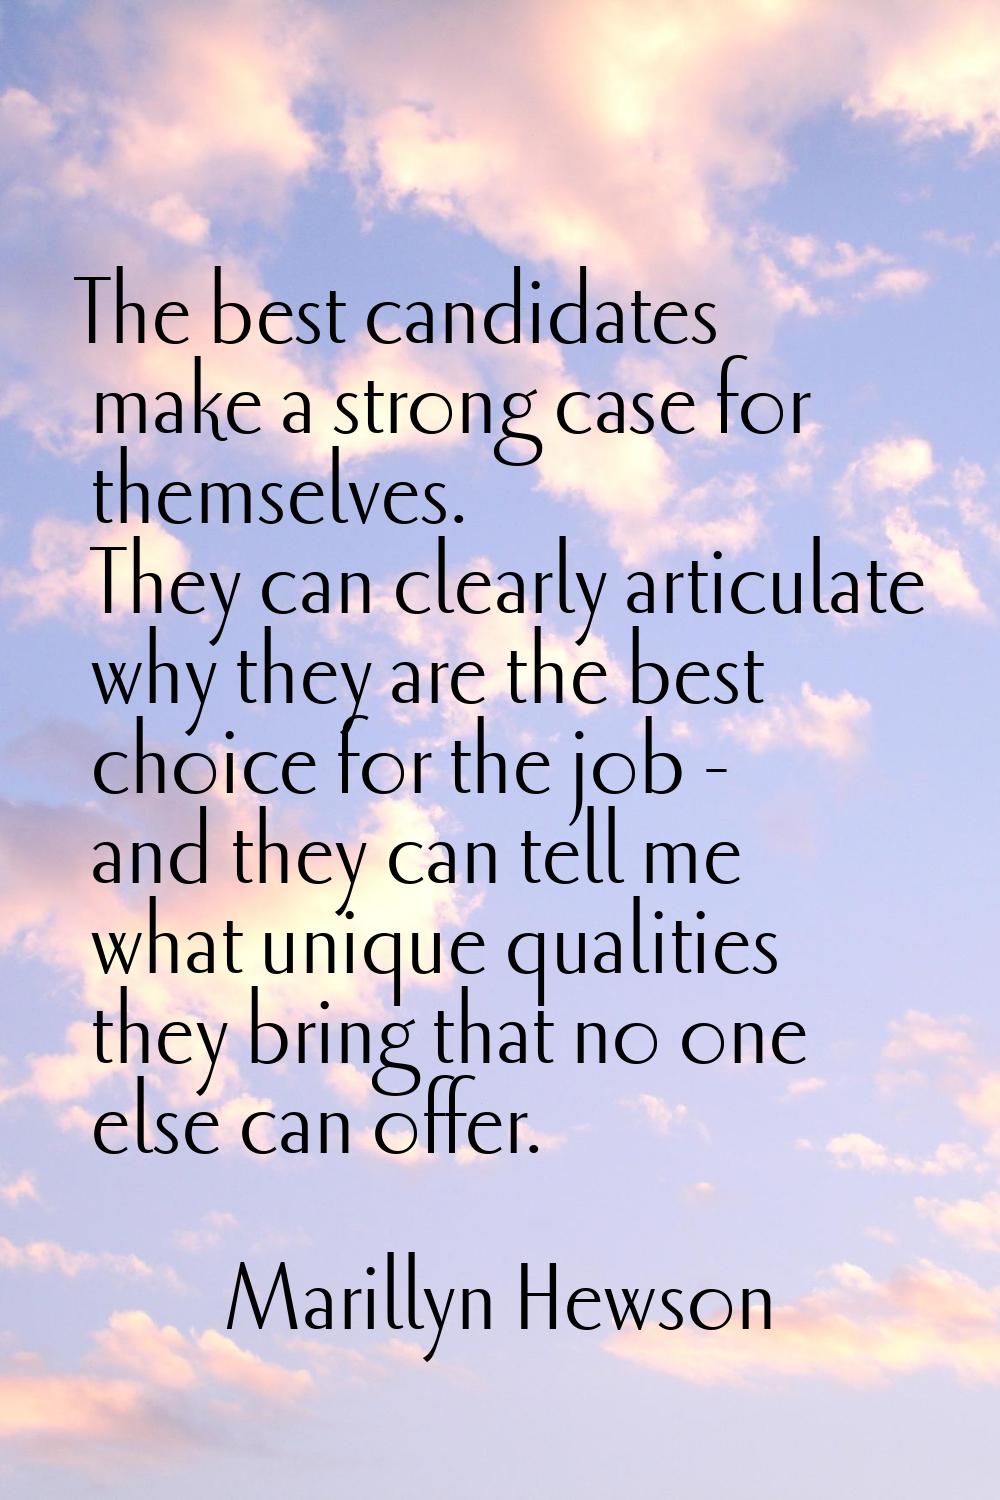 The best candidates make a strong case for themselves. They can clearly articulate why they are the